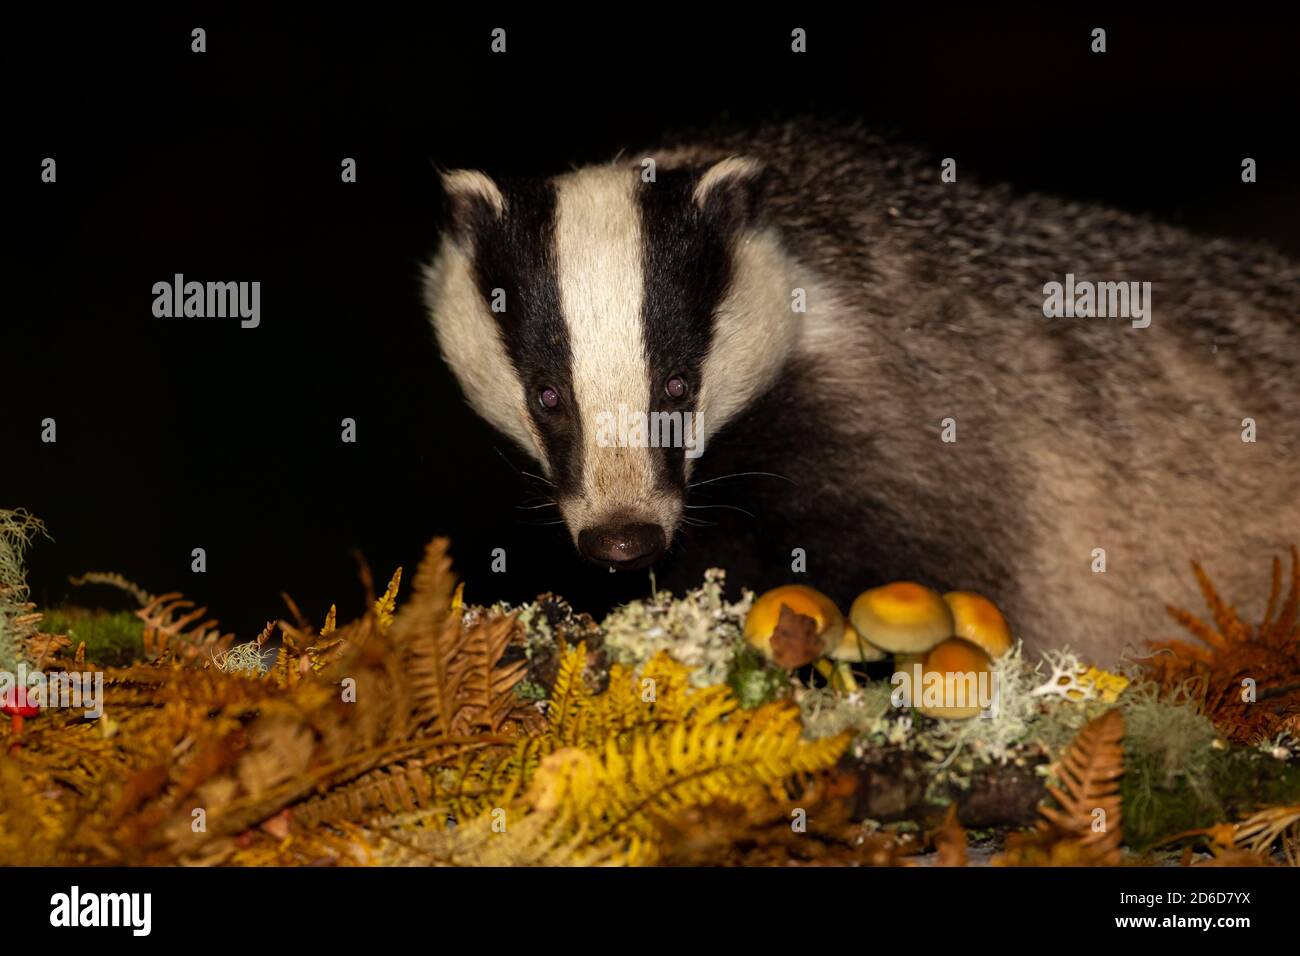 Badger (Scientific name: Meles Meles). Wild, native badger in Autumn, with toadstools and golden bracken.  Facing forward. Night-time image. Copyspace Stock Photo